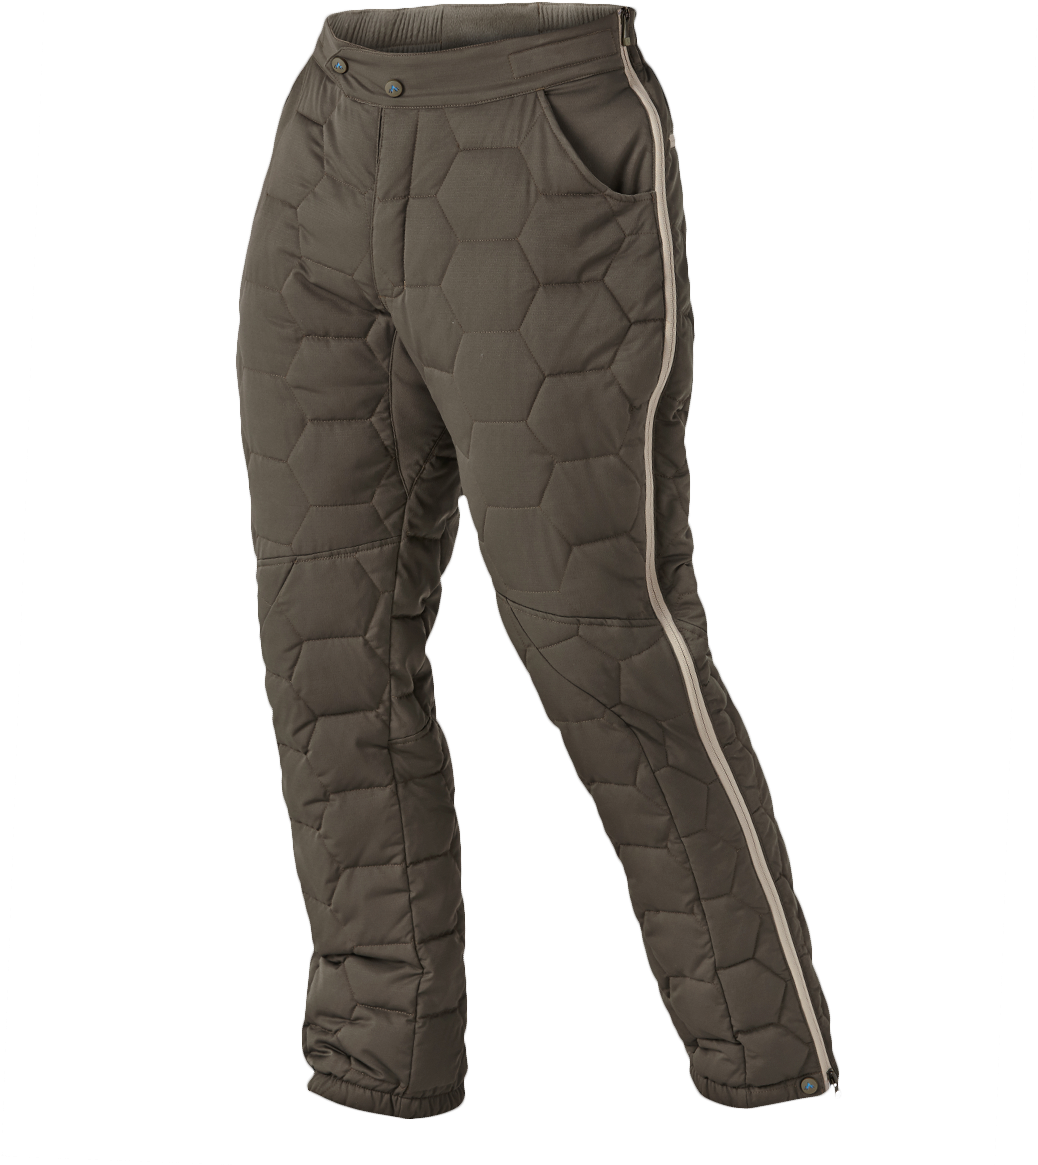 The Insulator Outdoor Pant By Pnuma Outdoors - Cold Pants (1200x1200), Png Download